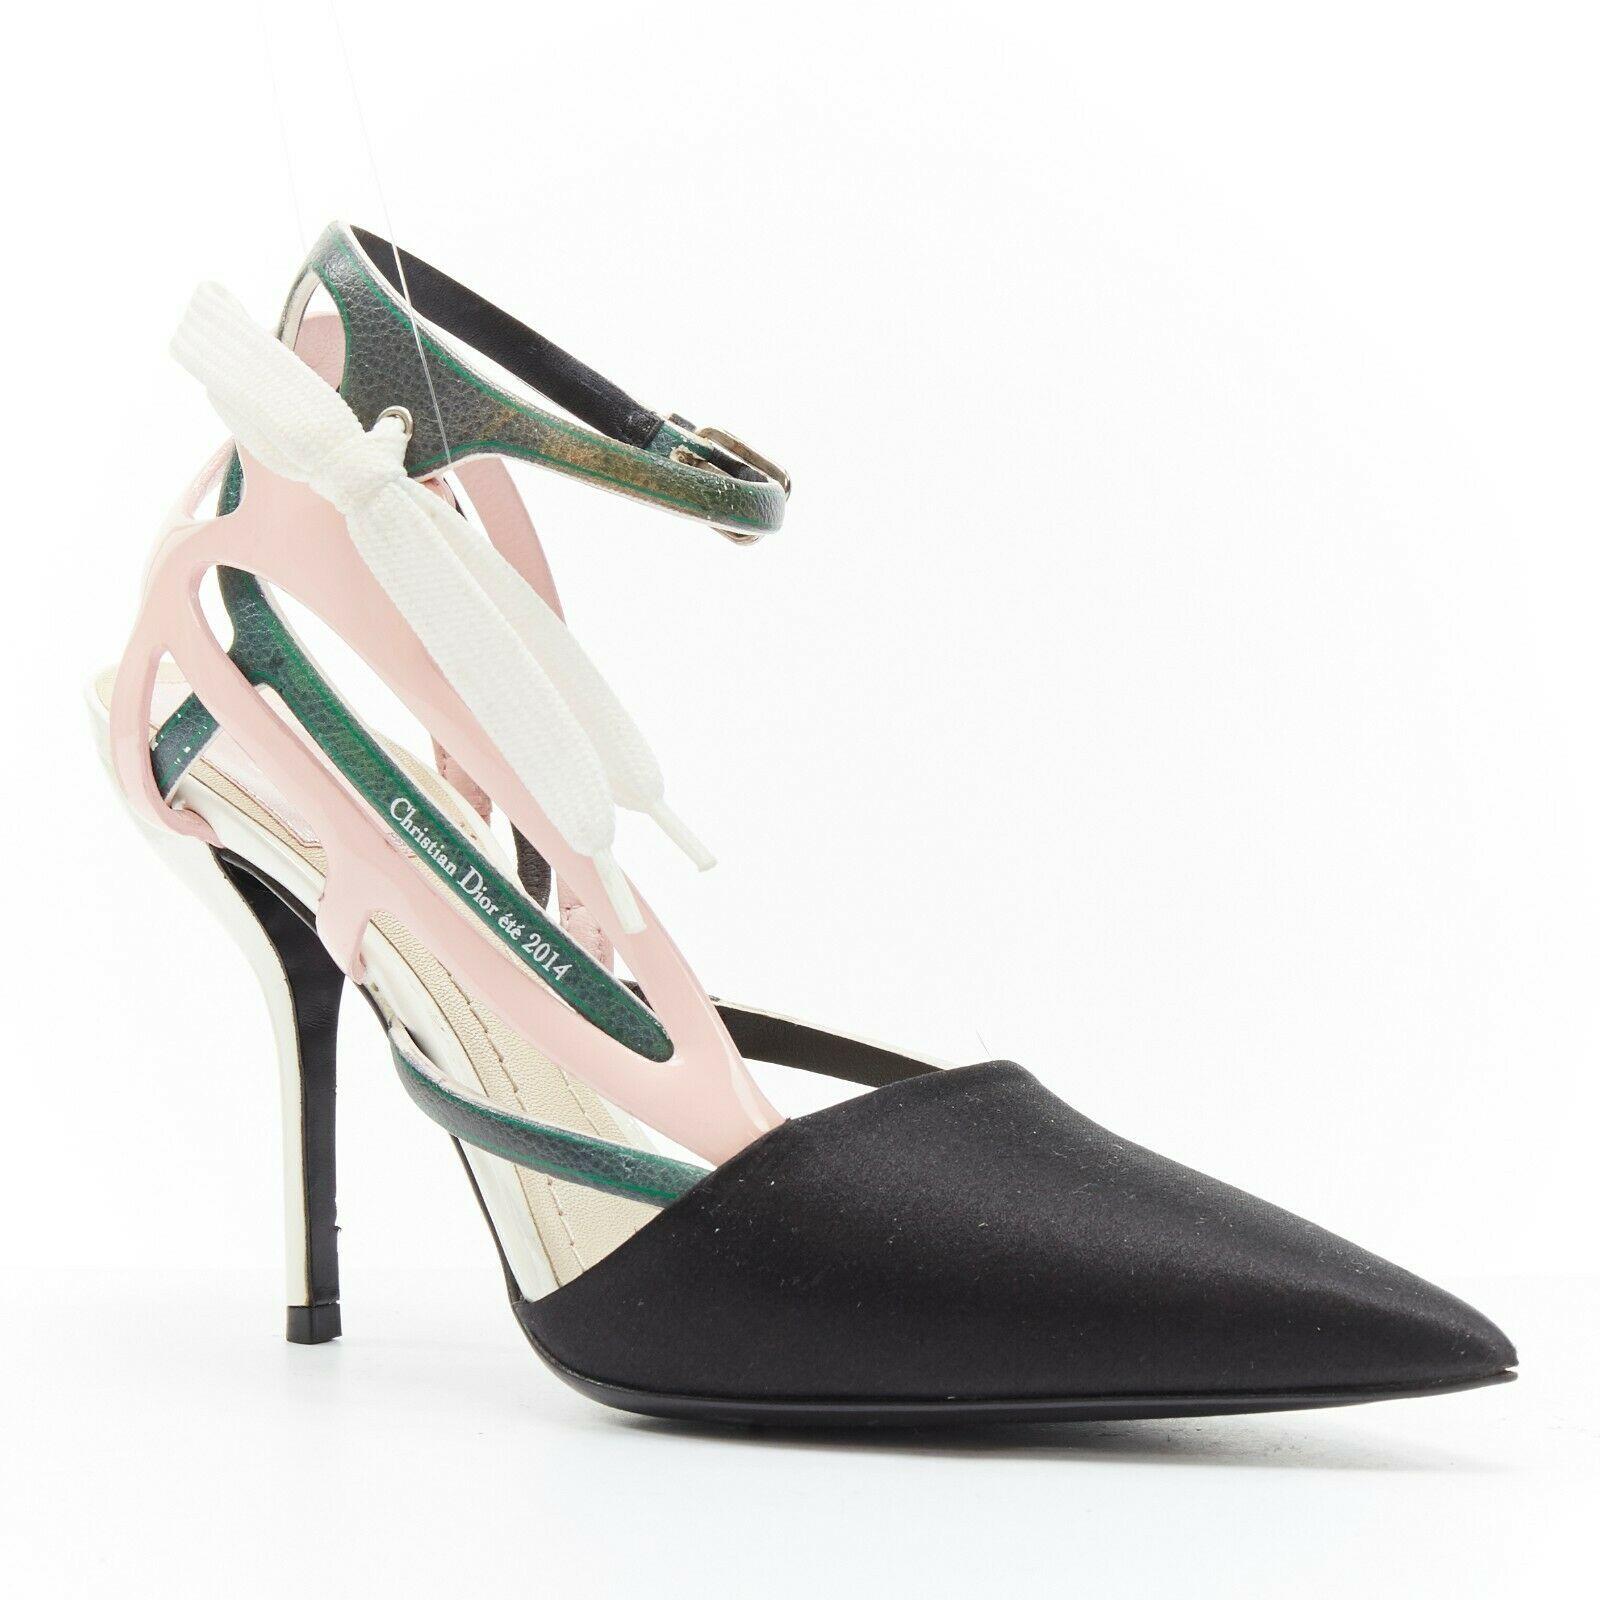 CHRISTIAN DIOR RAF SIMONS black dorsay toe green pink lace ribbon heels EU36
CHRISTIAN DIOR BY RAF SIMONS
Black satin pointed toe. Dorsay heel. 
Pink patent and green printed leather strappy upper. White nylon lace ribbon detailing. 
Ankle strap